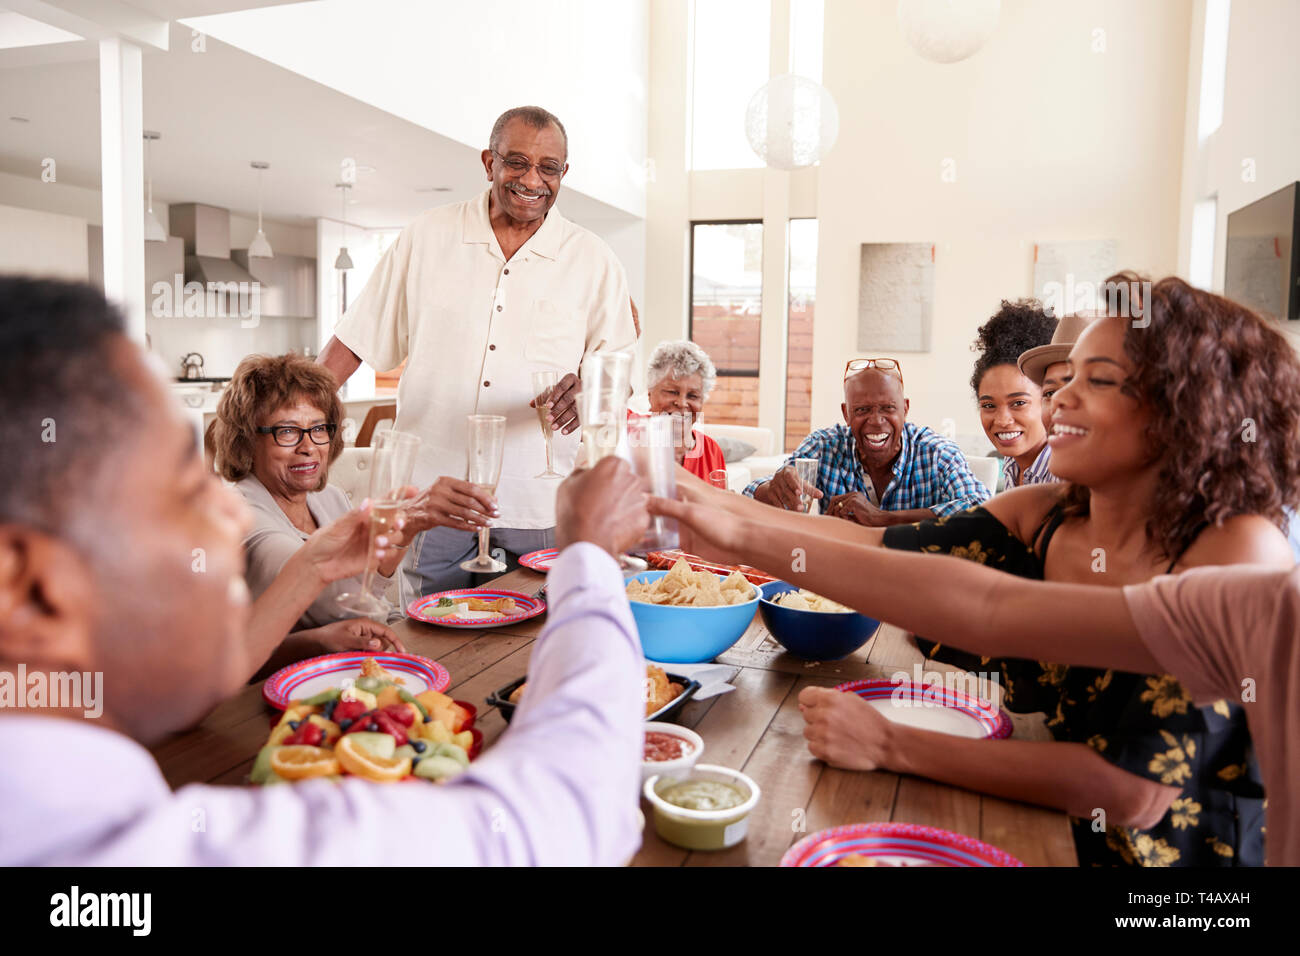 Grandfather standing to make a speech at the table with his family, close up Stock Photo